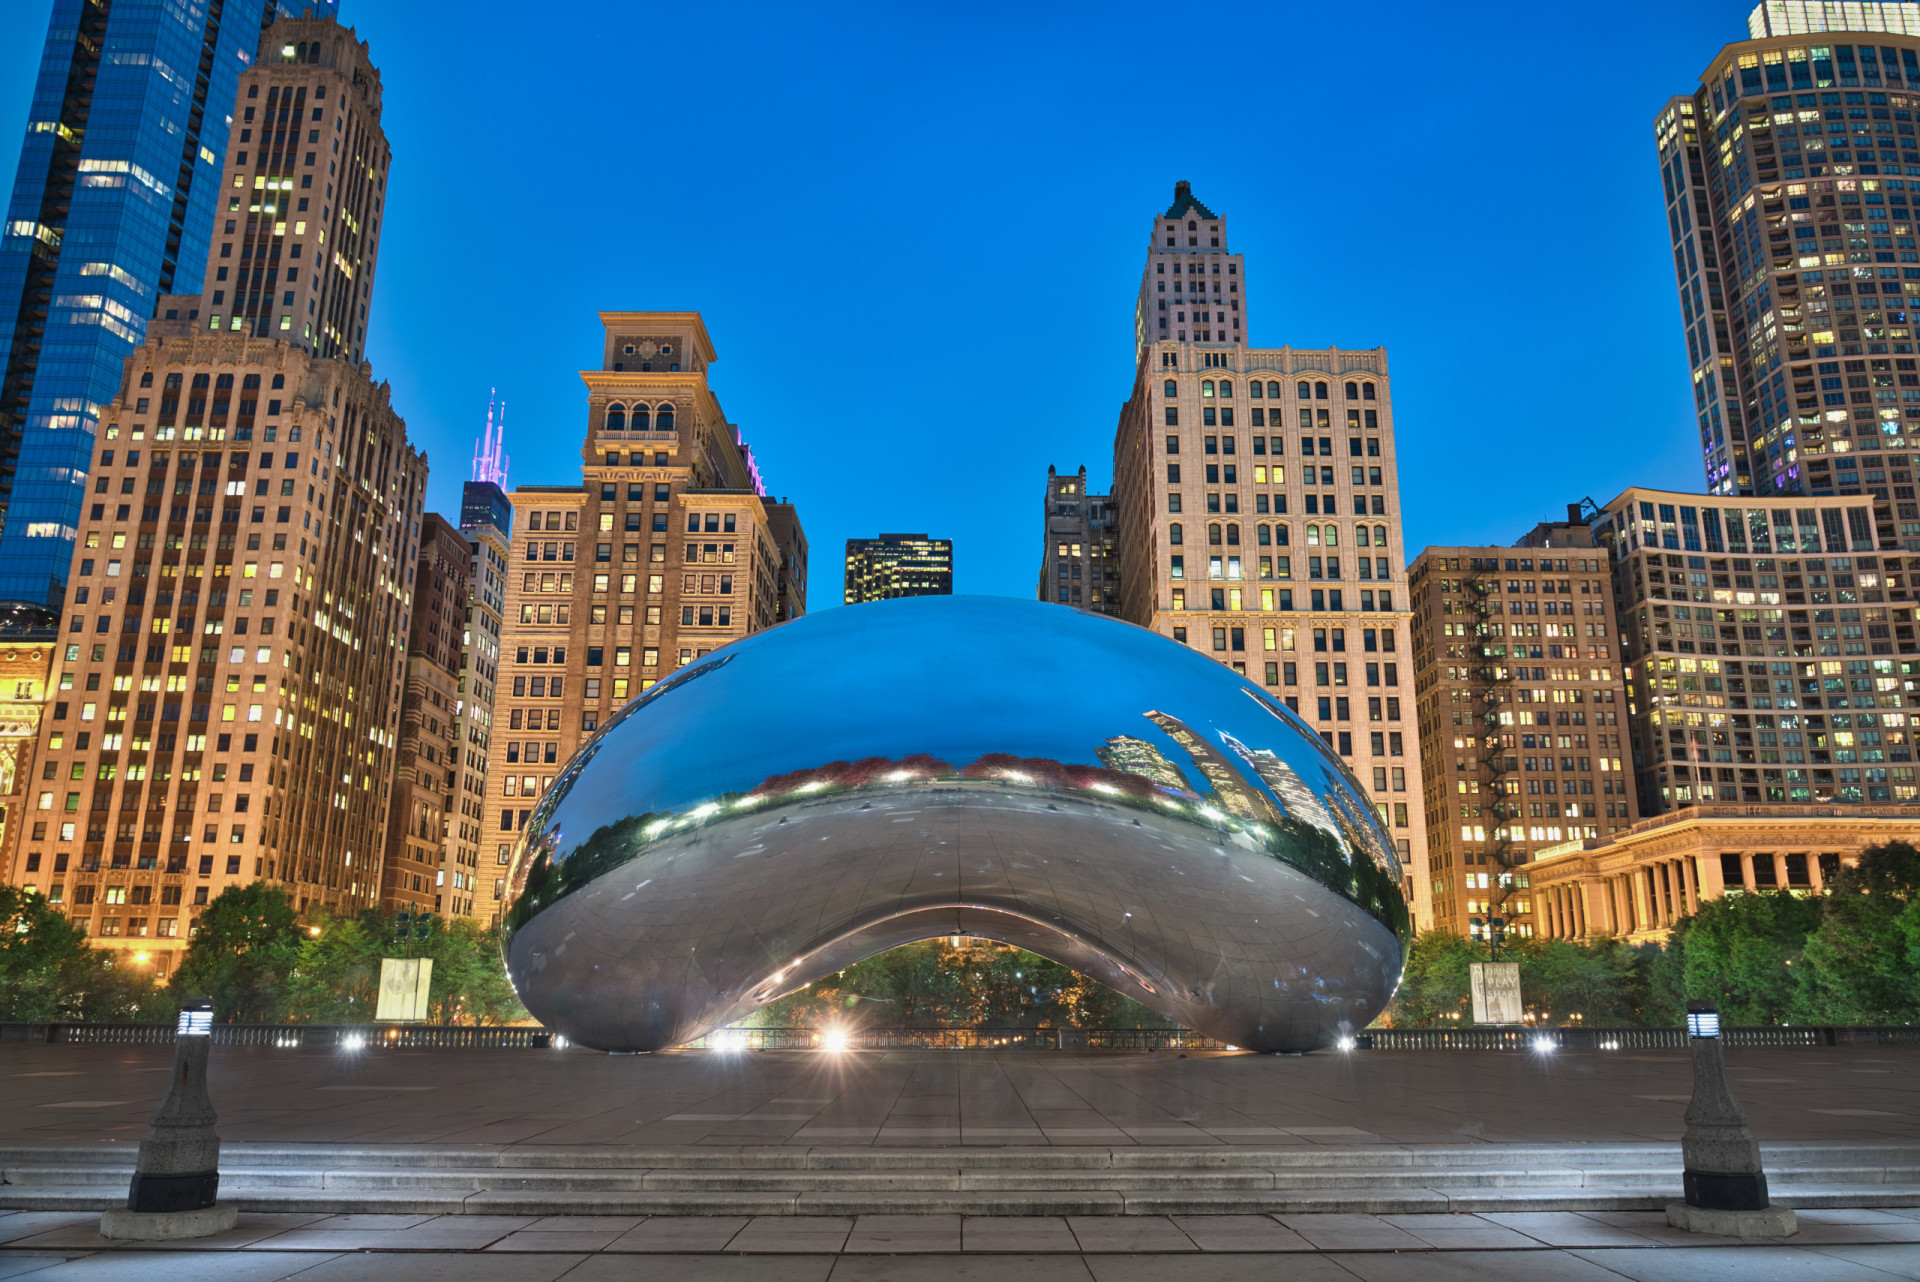 <p>Chicago, with a rent index of 56.0, is a blend of architectural marvels and culture. As one of America's largest cities, it offers a dynamic urban lifestyle. However, it's also one of the most expensive to live in. </p><p><a href="https://www.msn.com/en-in/community/channel/vid-7xx8mnucu55yw63we9va2gwr7uihbxwc68fxqp25x6tg4ftibpra?cvid=94631541bc0f4f89bfd59158d696ad7e">Follow us and access great exclusive content every day</a></p>